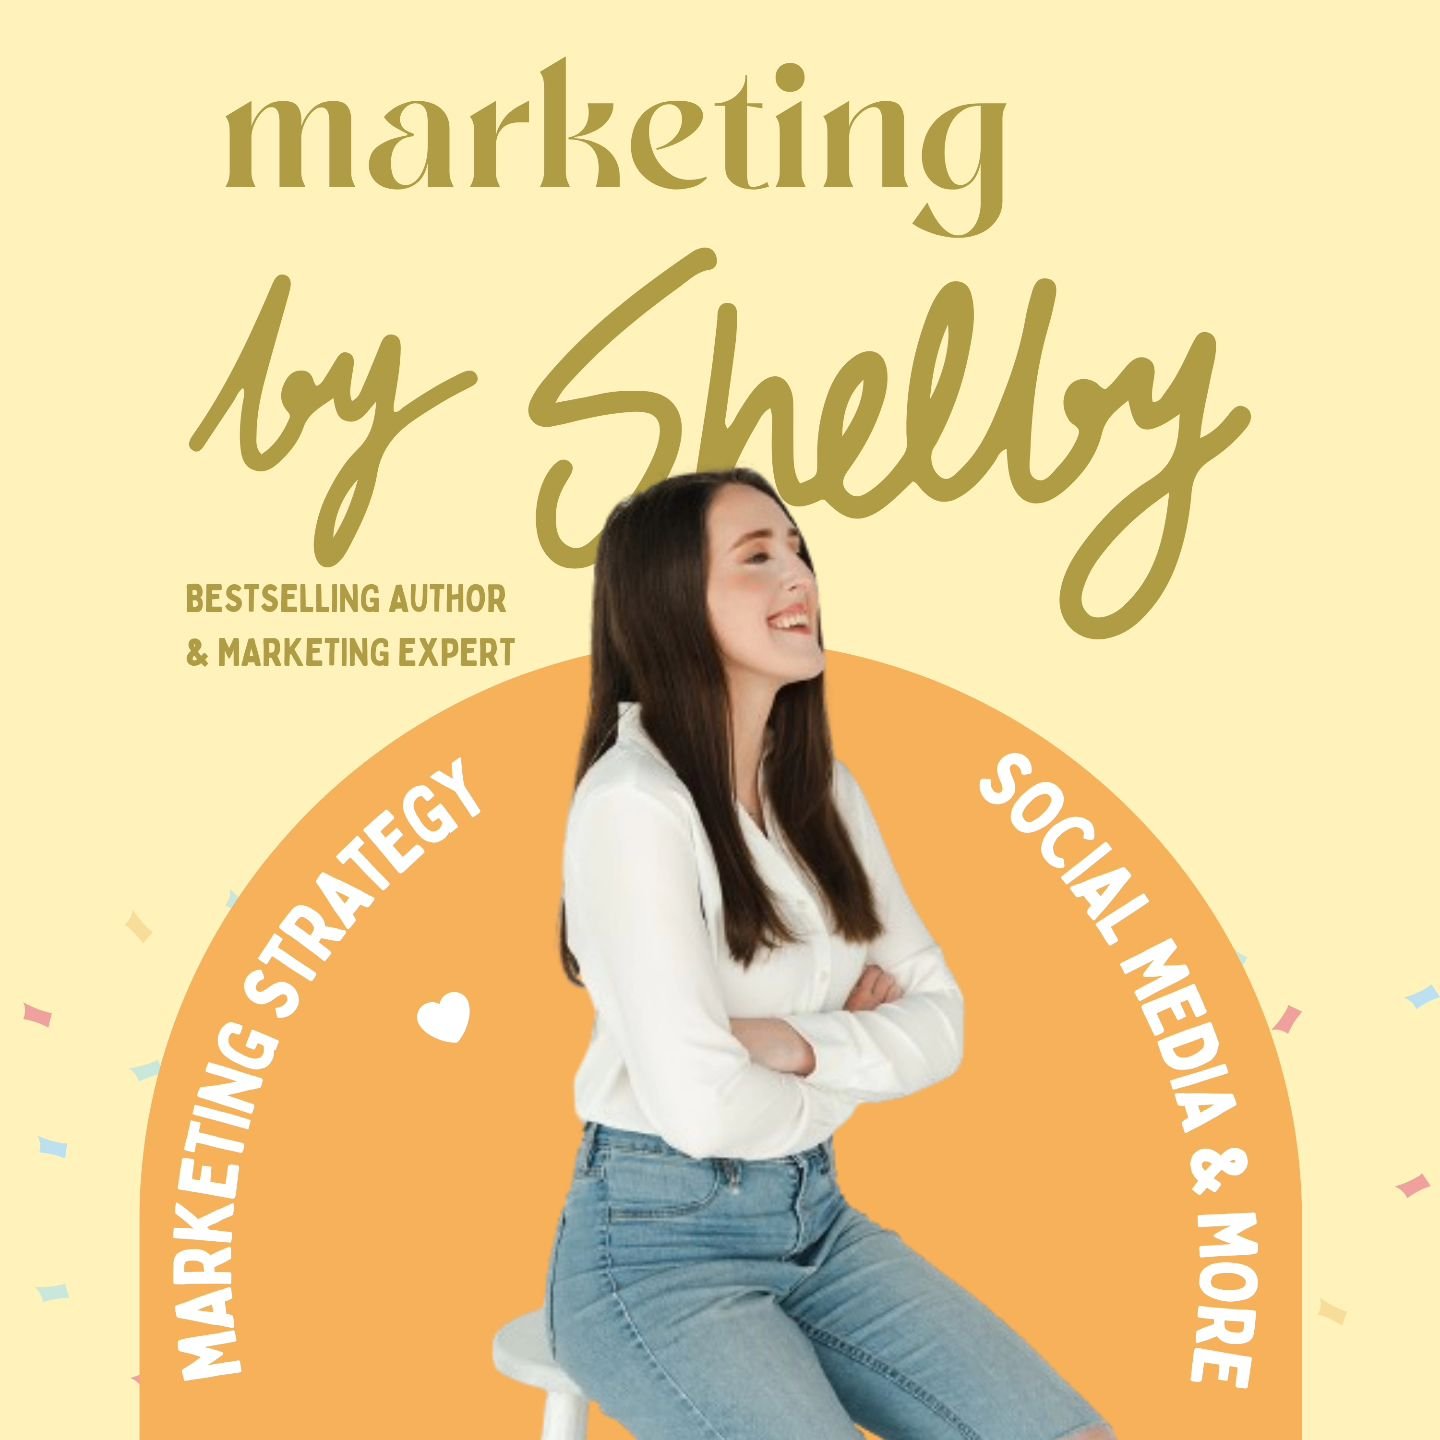 Introducing... the Marketing by Shelby podcast! 

Over the last 1.5 years I've been sharing weekly marketing videos on YouTube - now, if you prefer to listen to bite-sized marketing strategy tips on your drive to work, while making lunch, etc. you ca